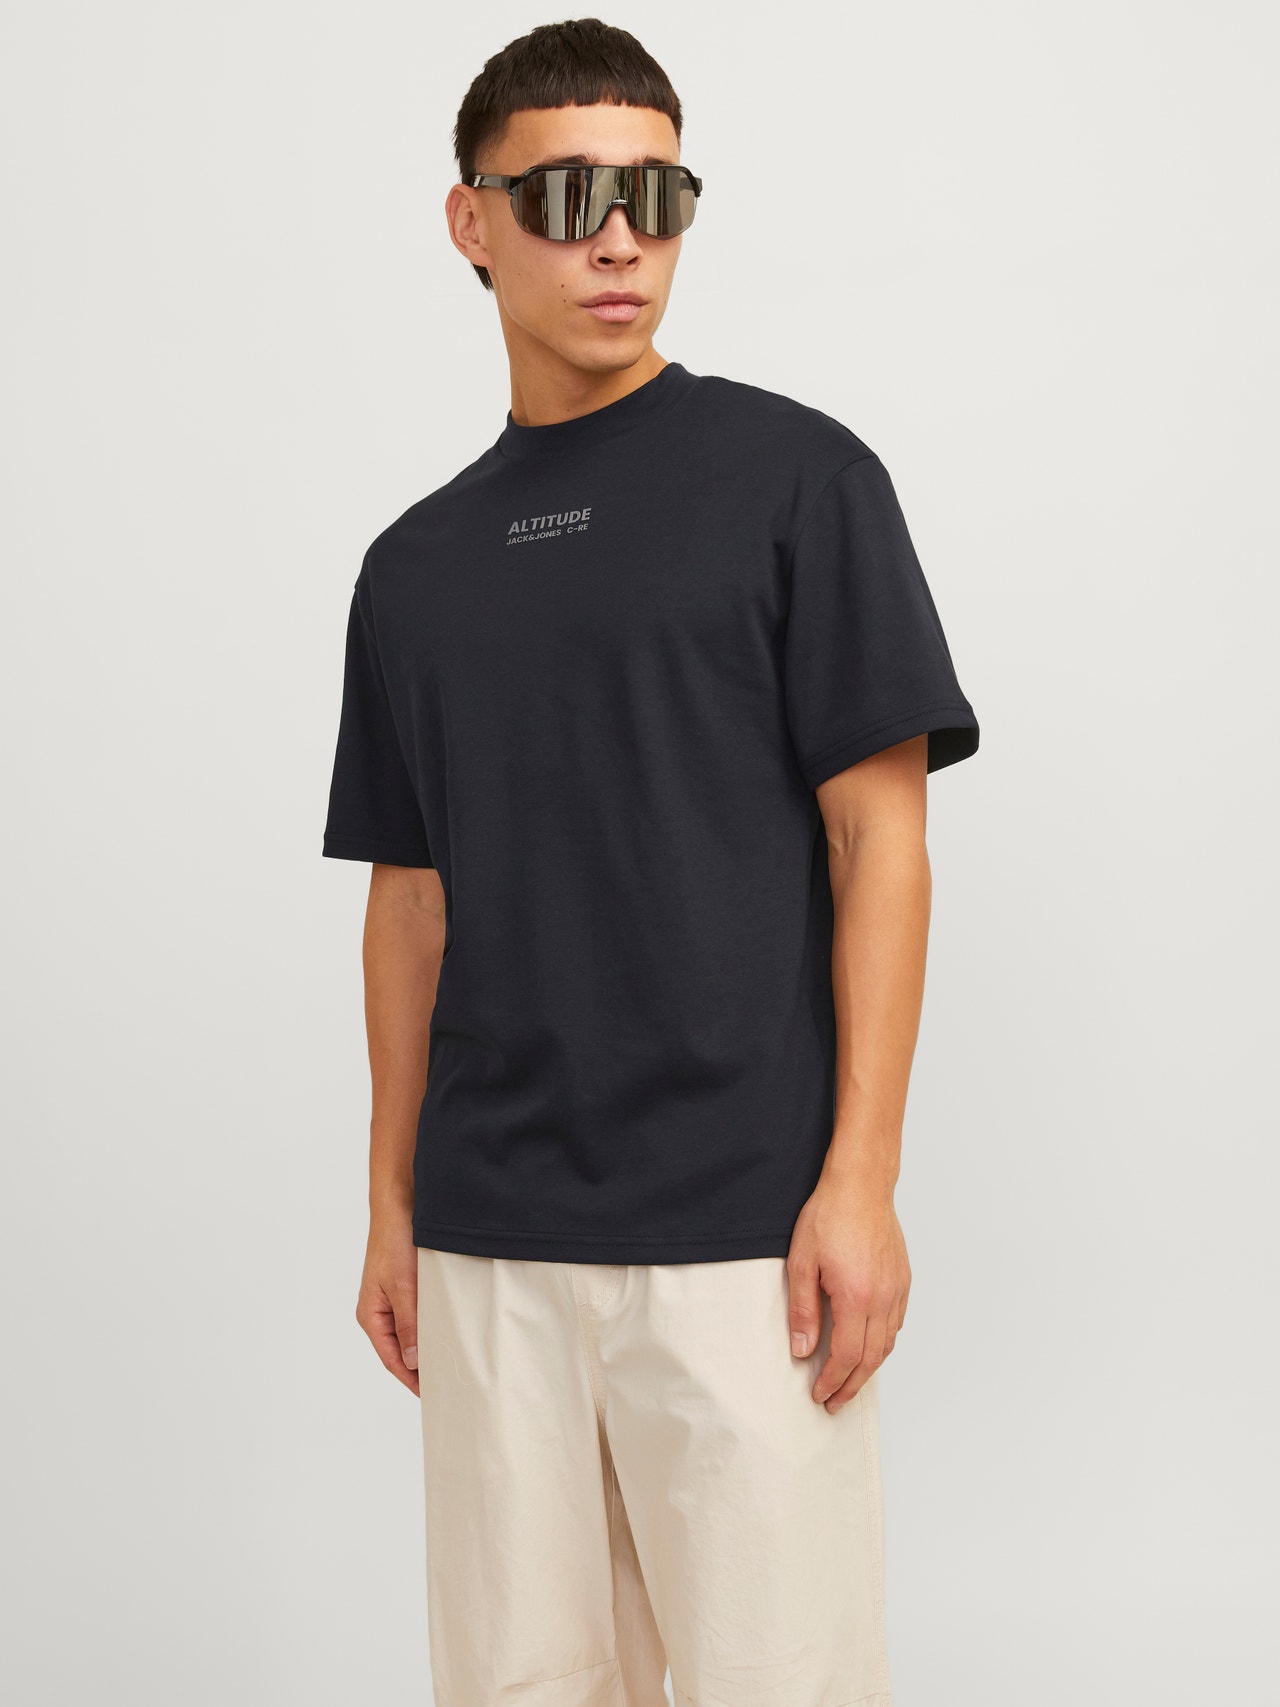 Jack & Jones Relaxed Fit Round Neck T-Shirt -Black - 12254988